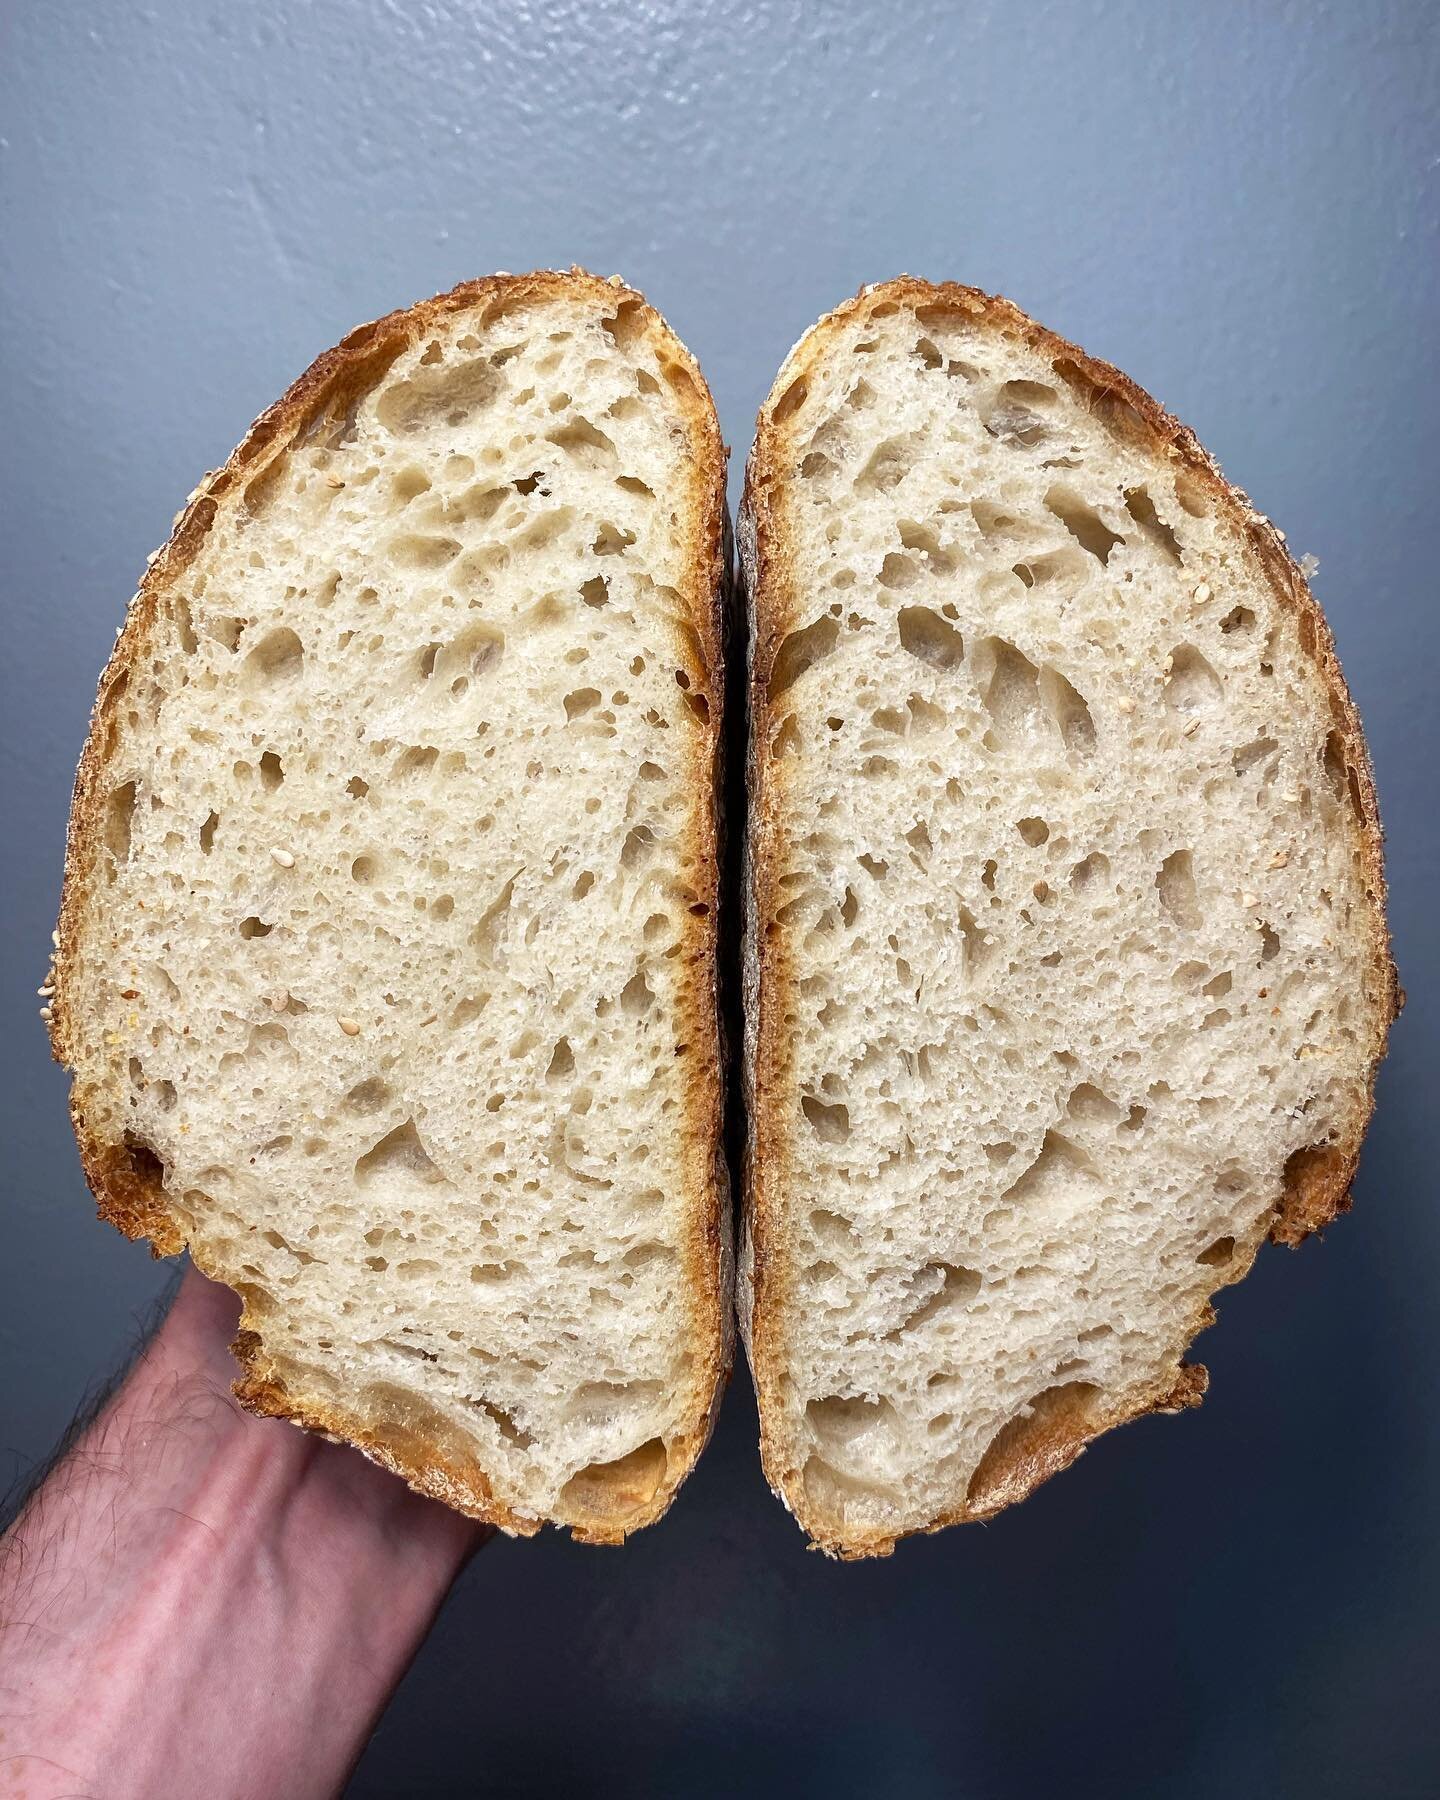 While it&rsquo;s not the most open crumb in the world this is definitely my most even and best tasting loaf so far. Ironically this was the least labor intensive procedure I&rsquo;ve followed.